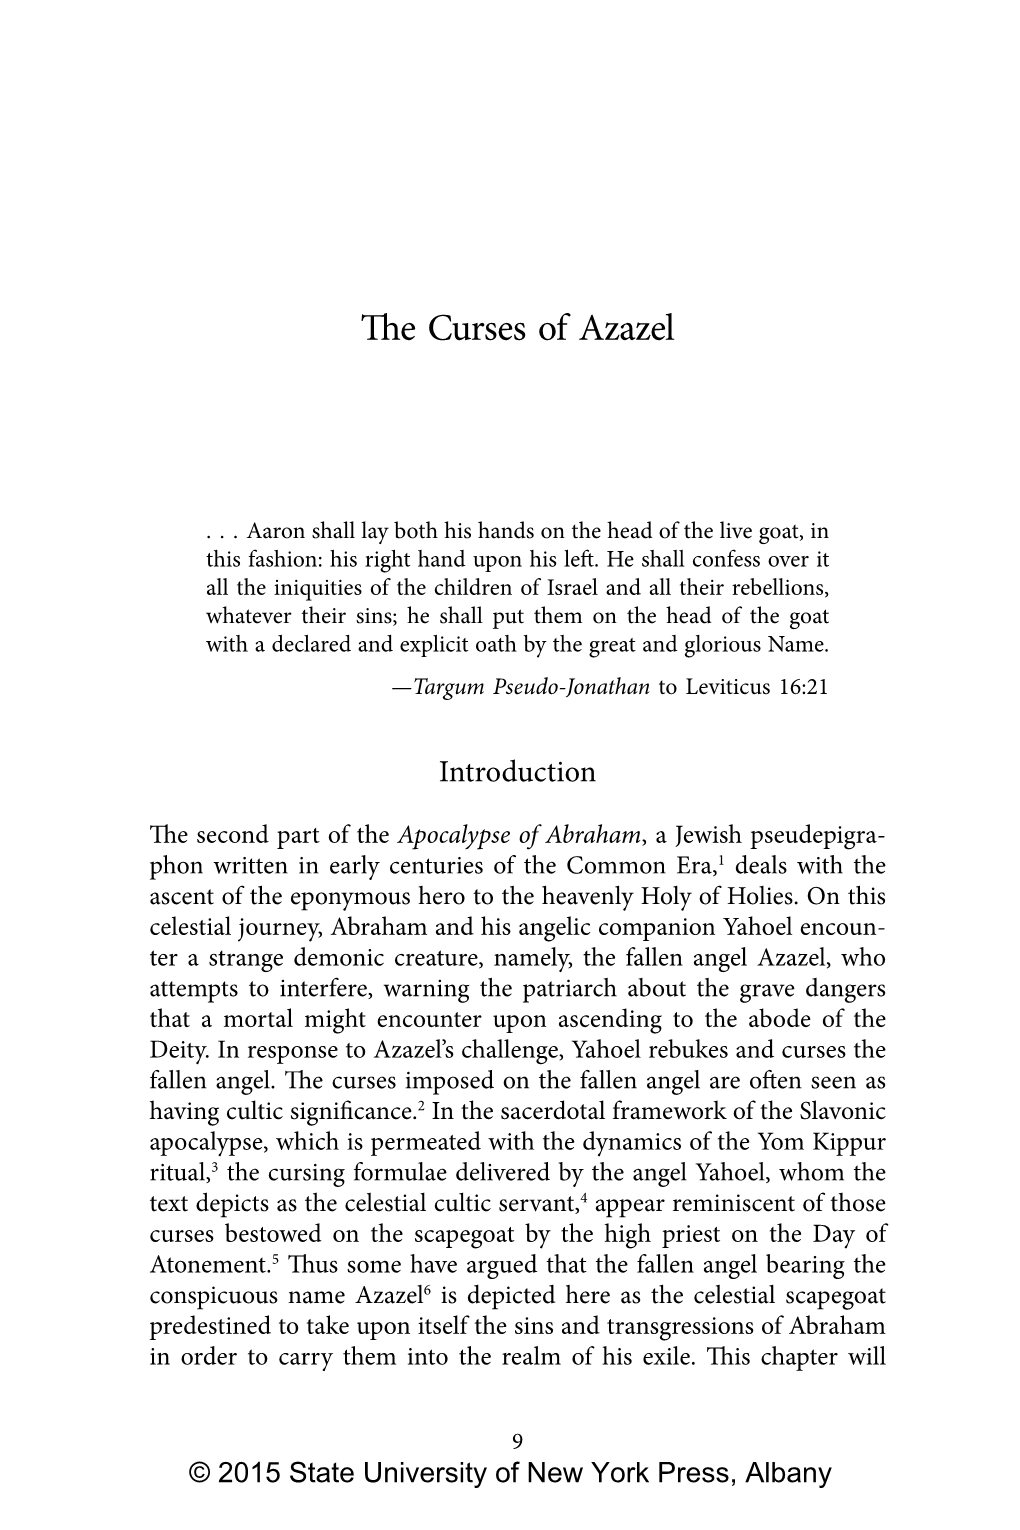 Divine Scapegoats Explore Azazel’S Curses and Their Role in the Sacerdotal Framework of the Slavonic Apocalypse